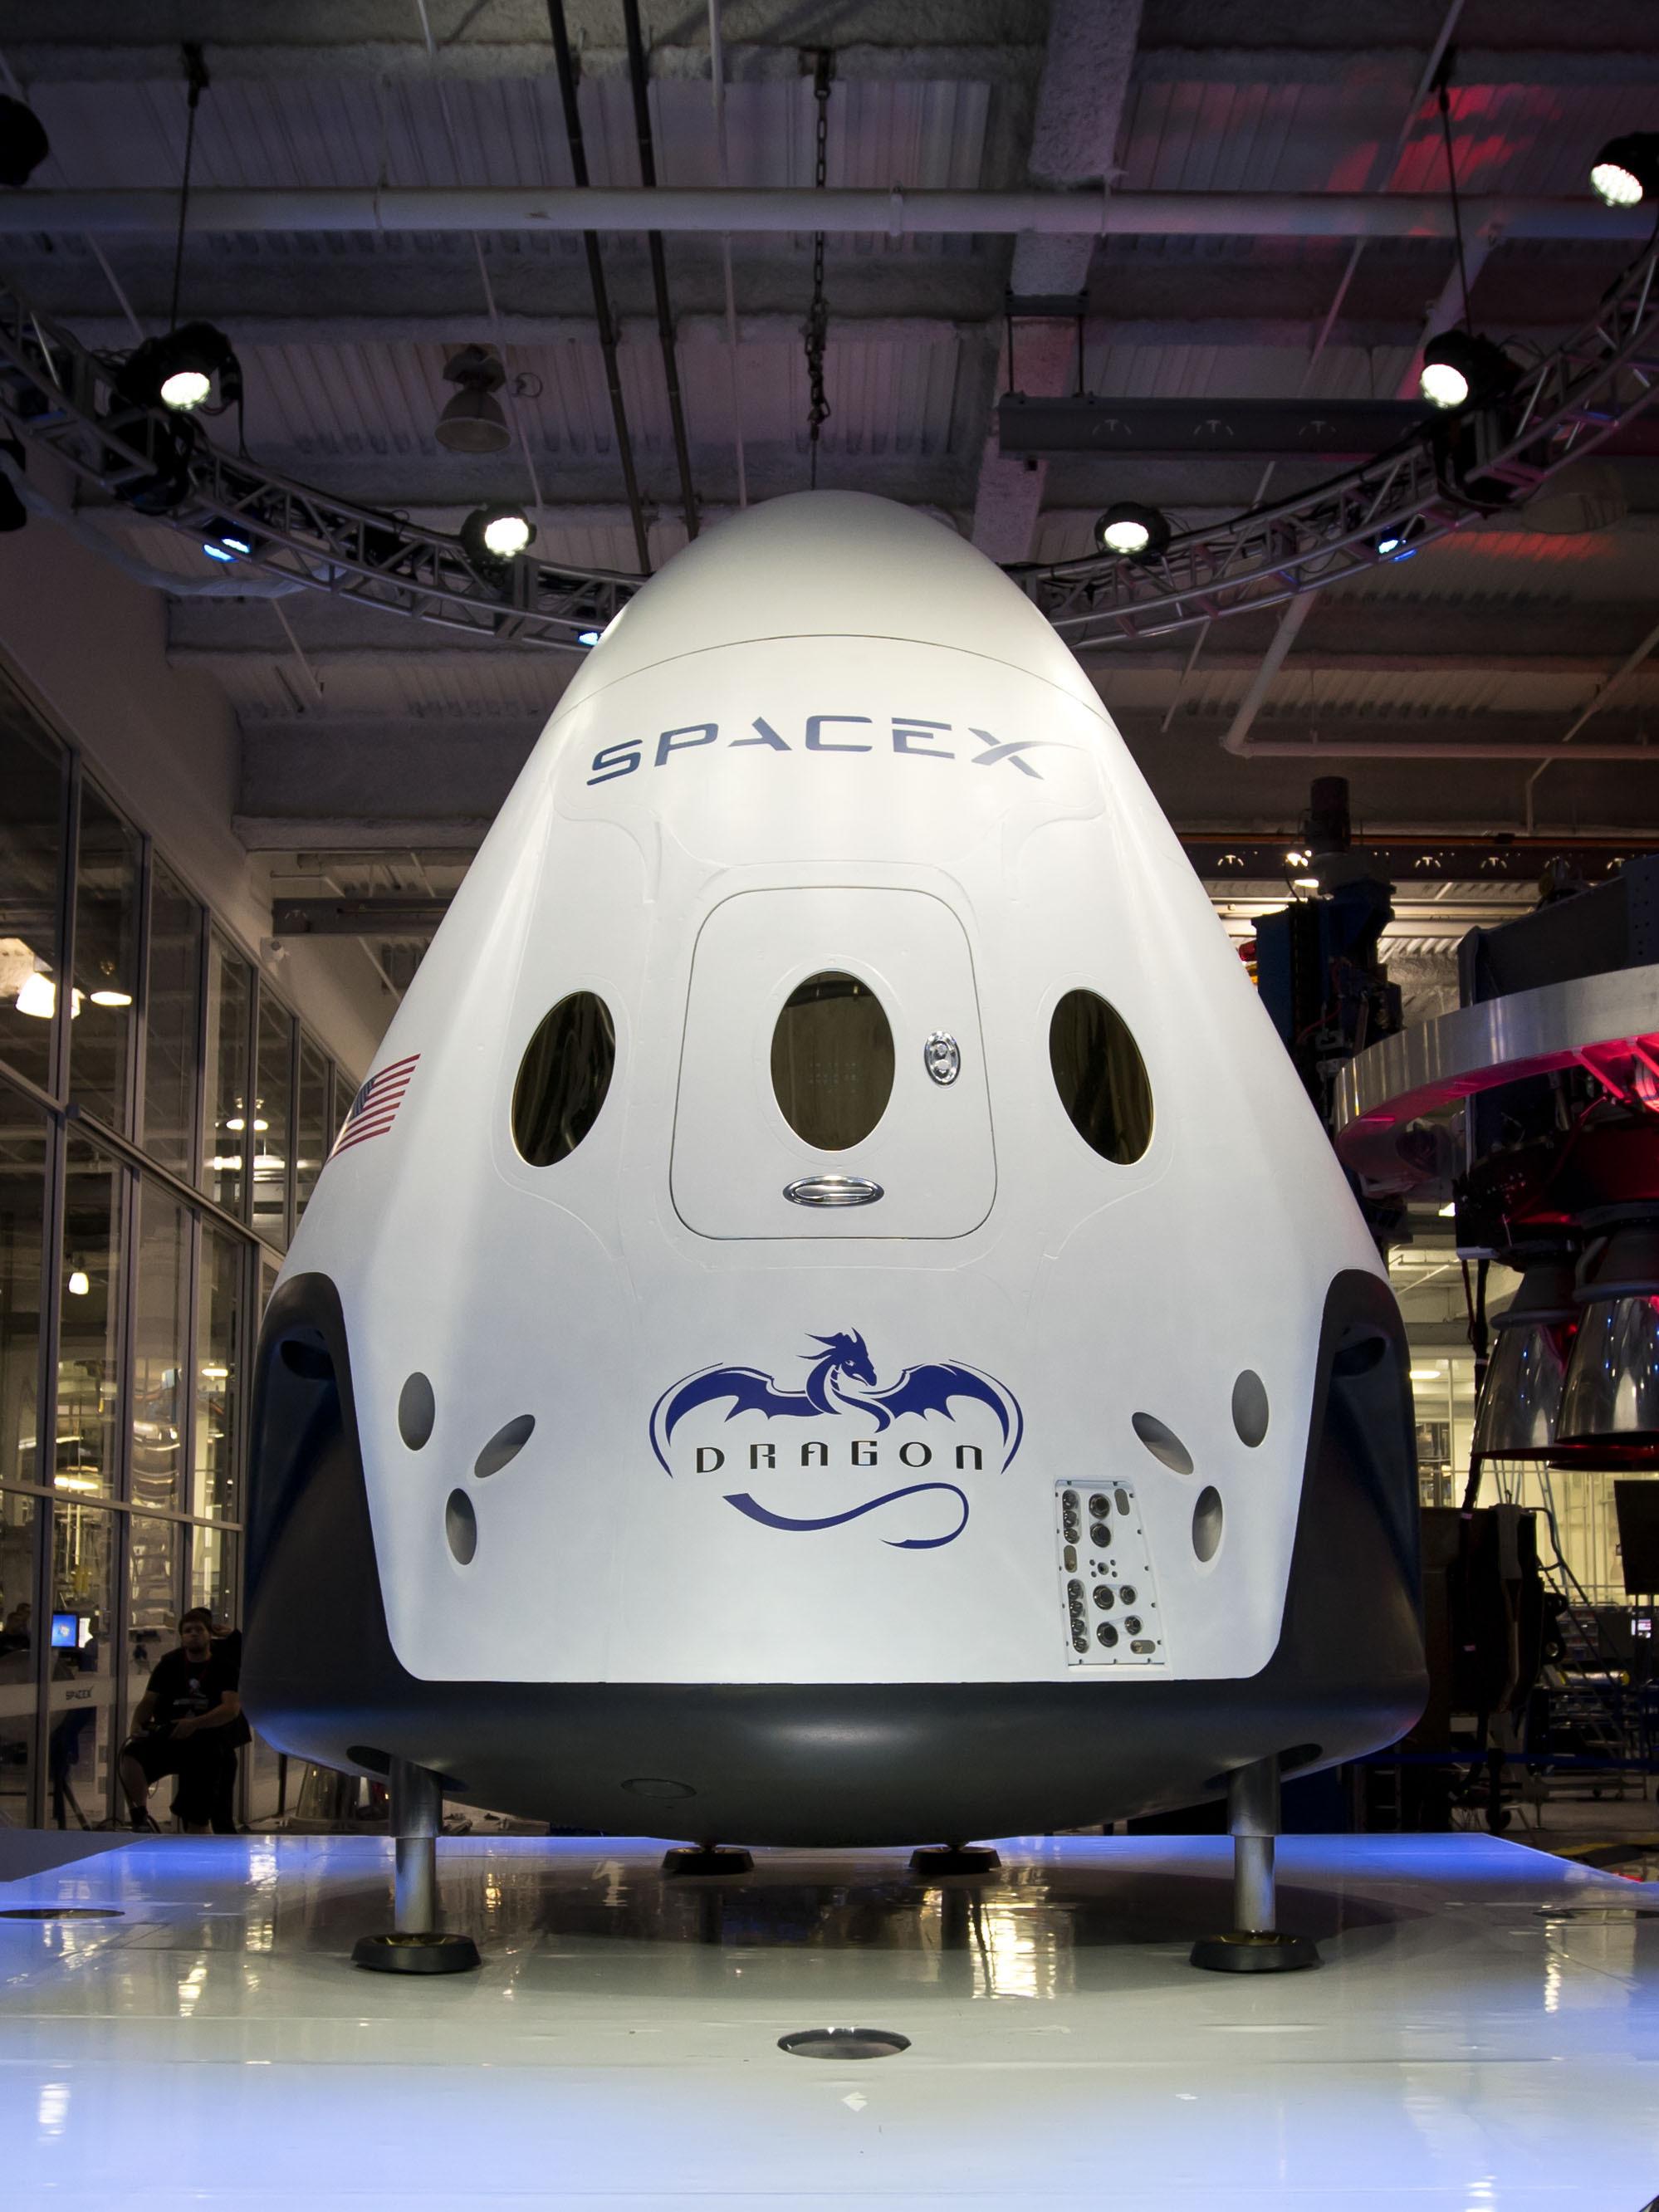 spacex"s new crew capsule was unveiled yesterday.